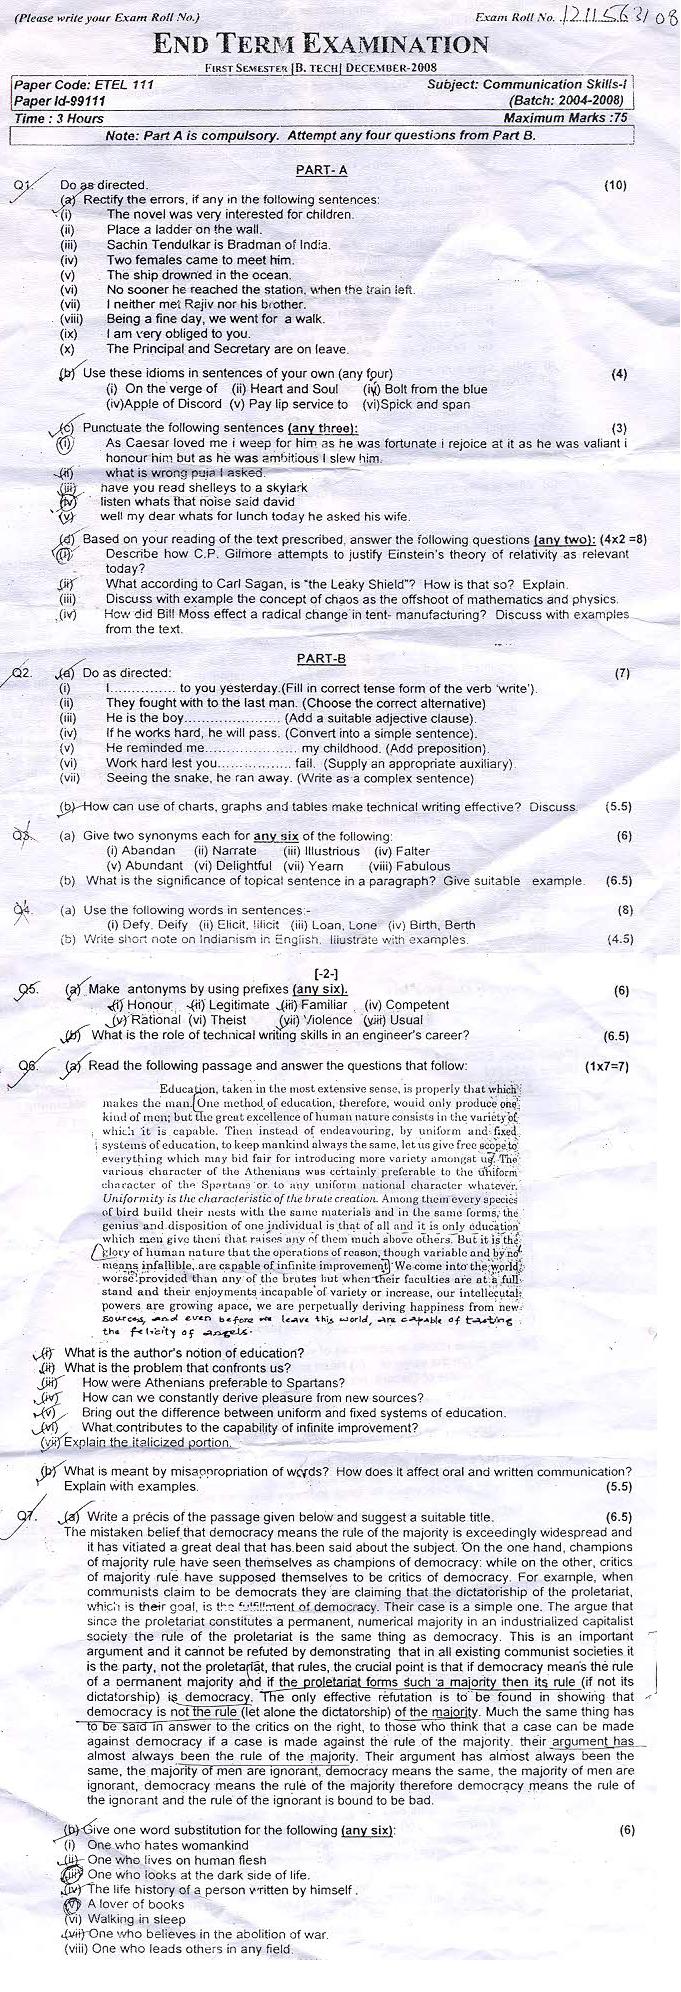 GGSIPU: Question Papers First Semester – end Term 2008 – ETEL-111